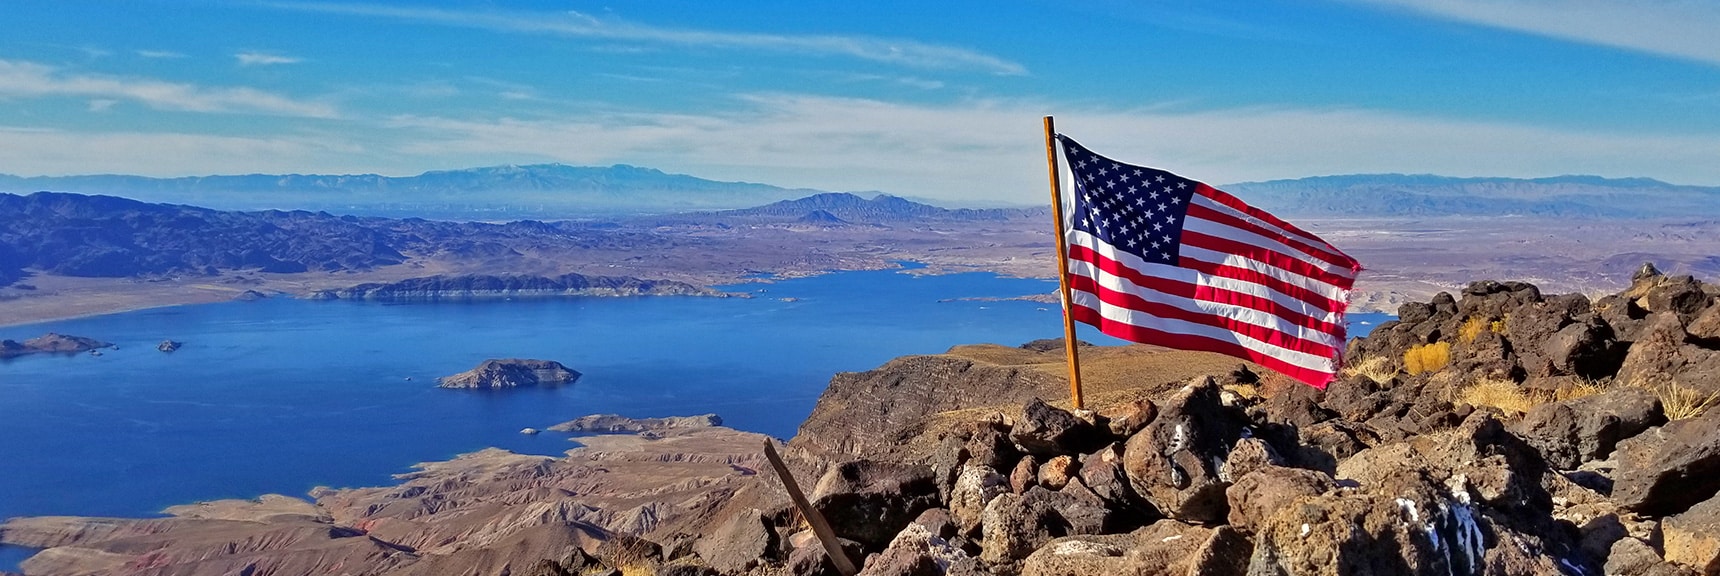 Arrival at Fortification Hill Summit! | Fortification Hill | Lake Mead National Recreation Area, Arizona